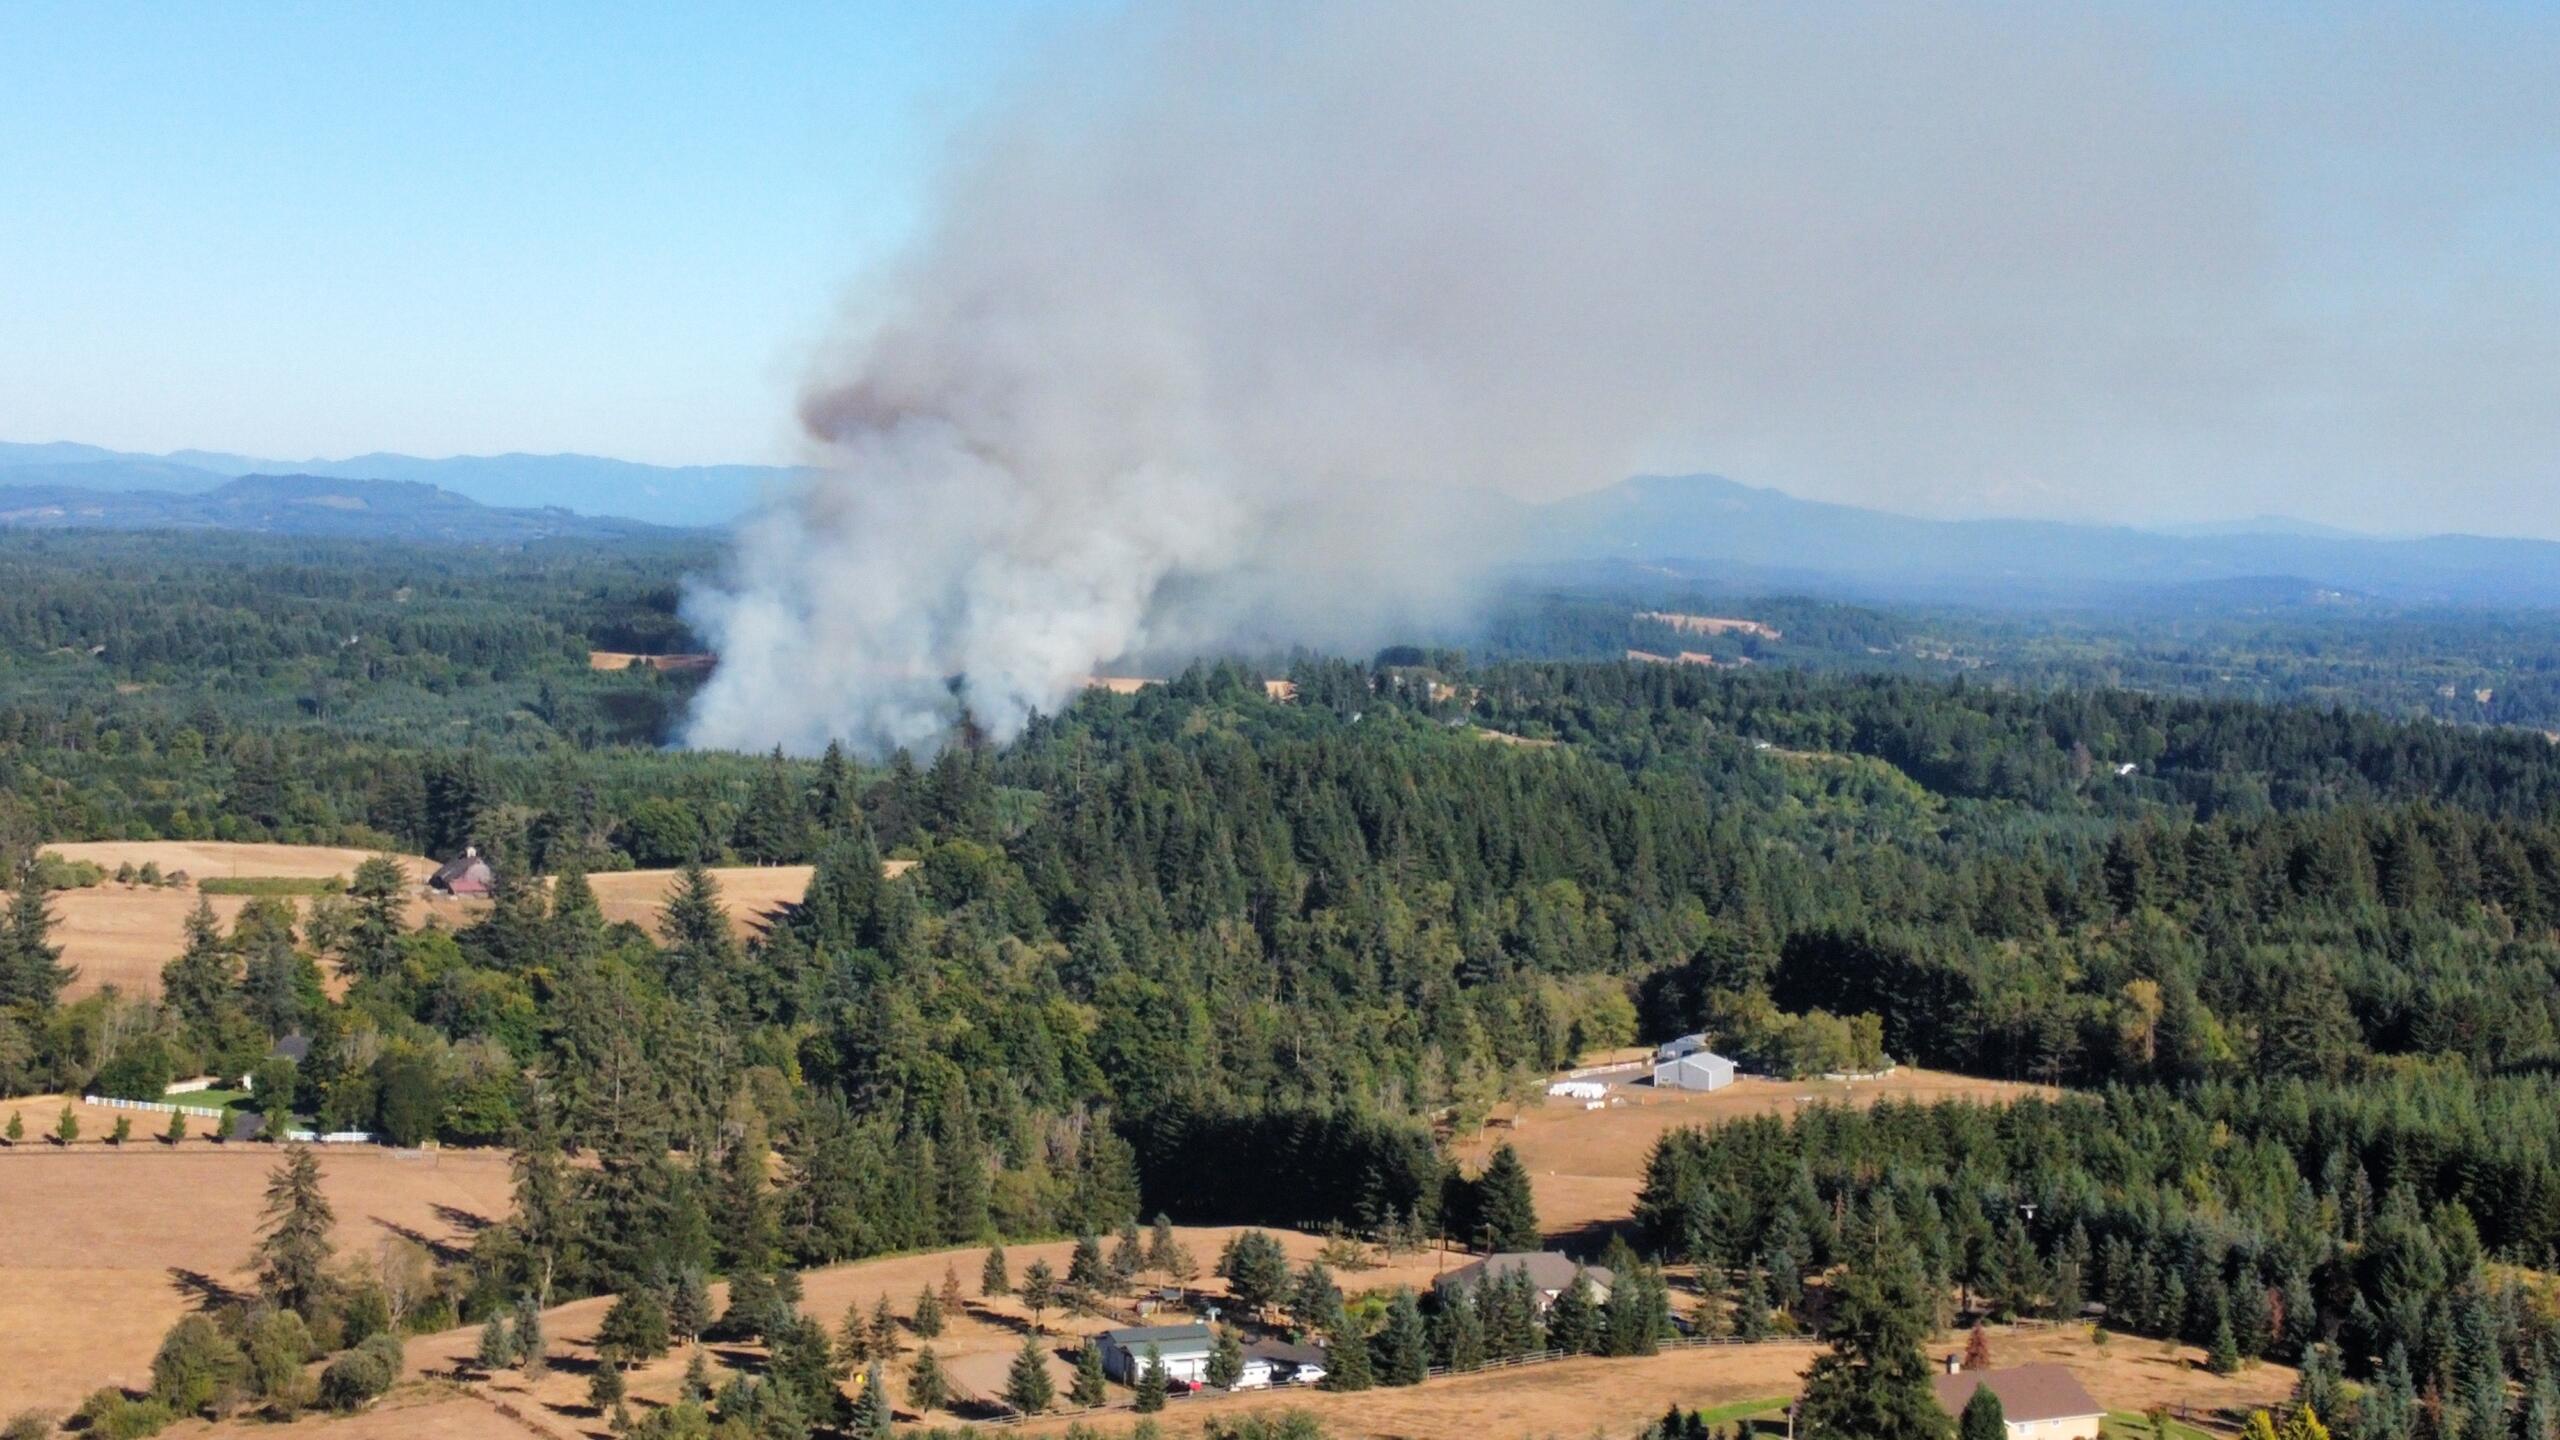 Smoke rises from a fire in a rural area near Northeast Jenny Creek Road on Wednesday afternoon. The fire began with a house fire that spread to nearby brush, prompting an evacuation of residences within a mile of the fire.